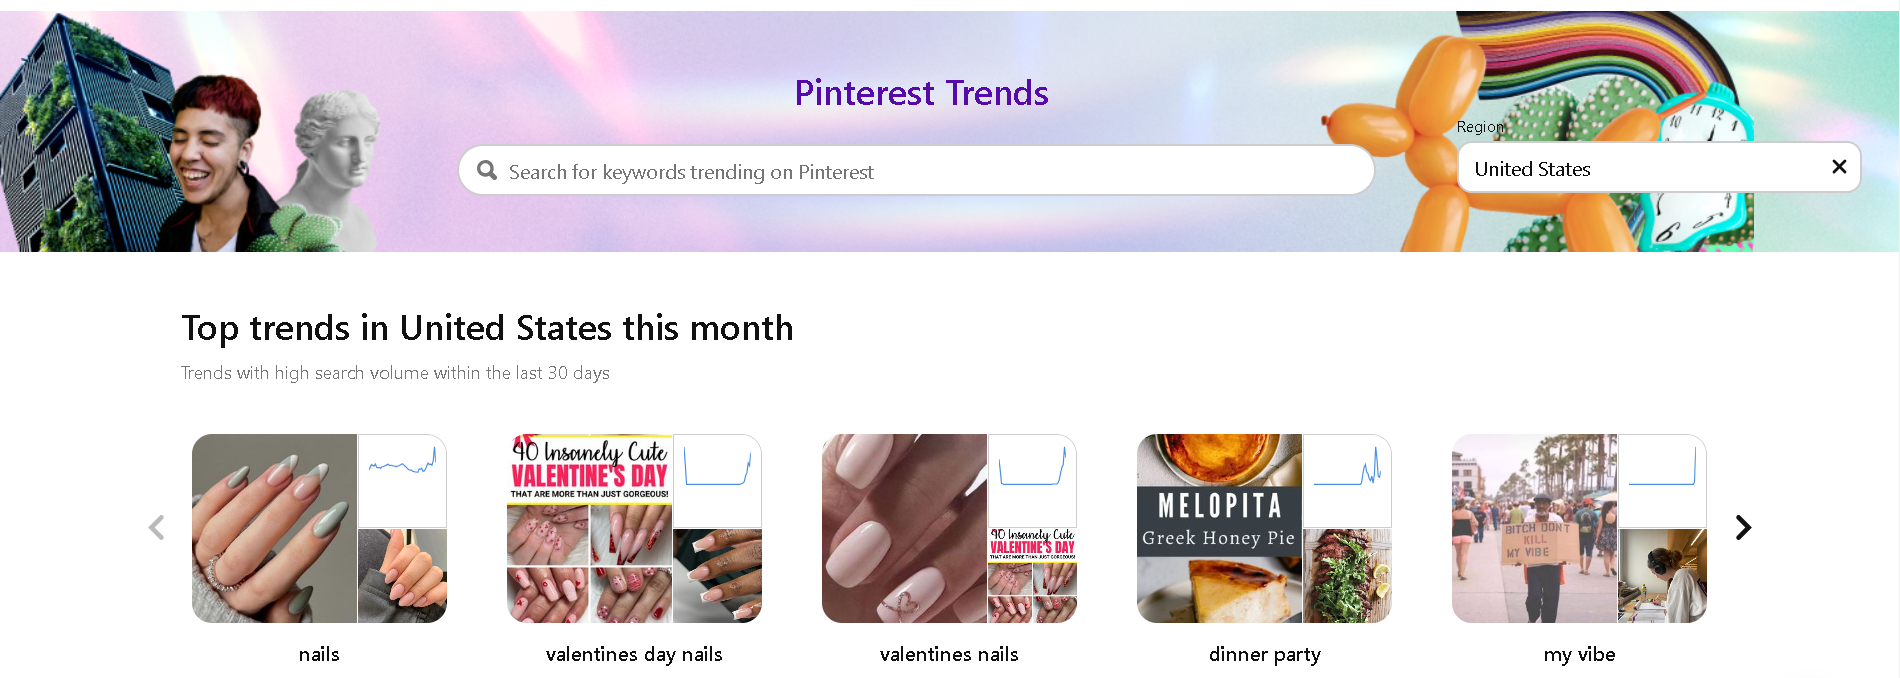 Check Pinterest Trends to be recognized better by the Pinterest search algorithm.